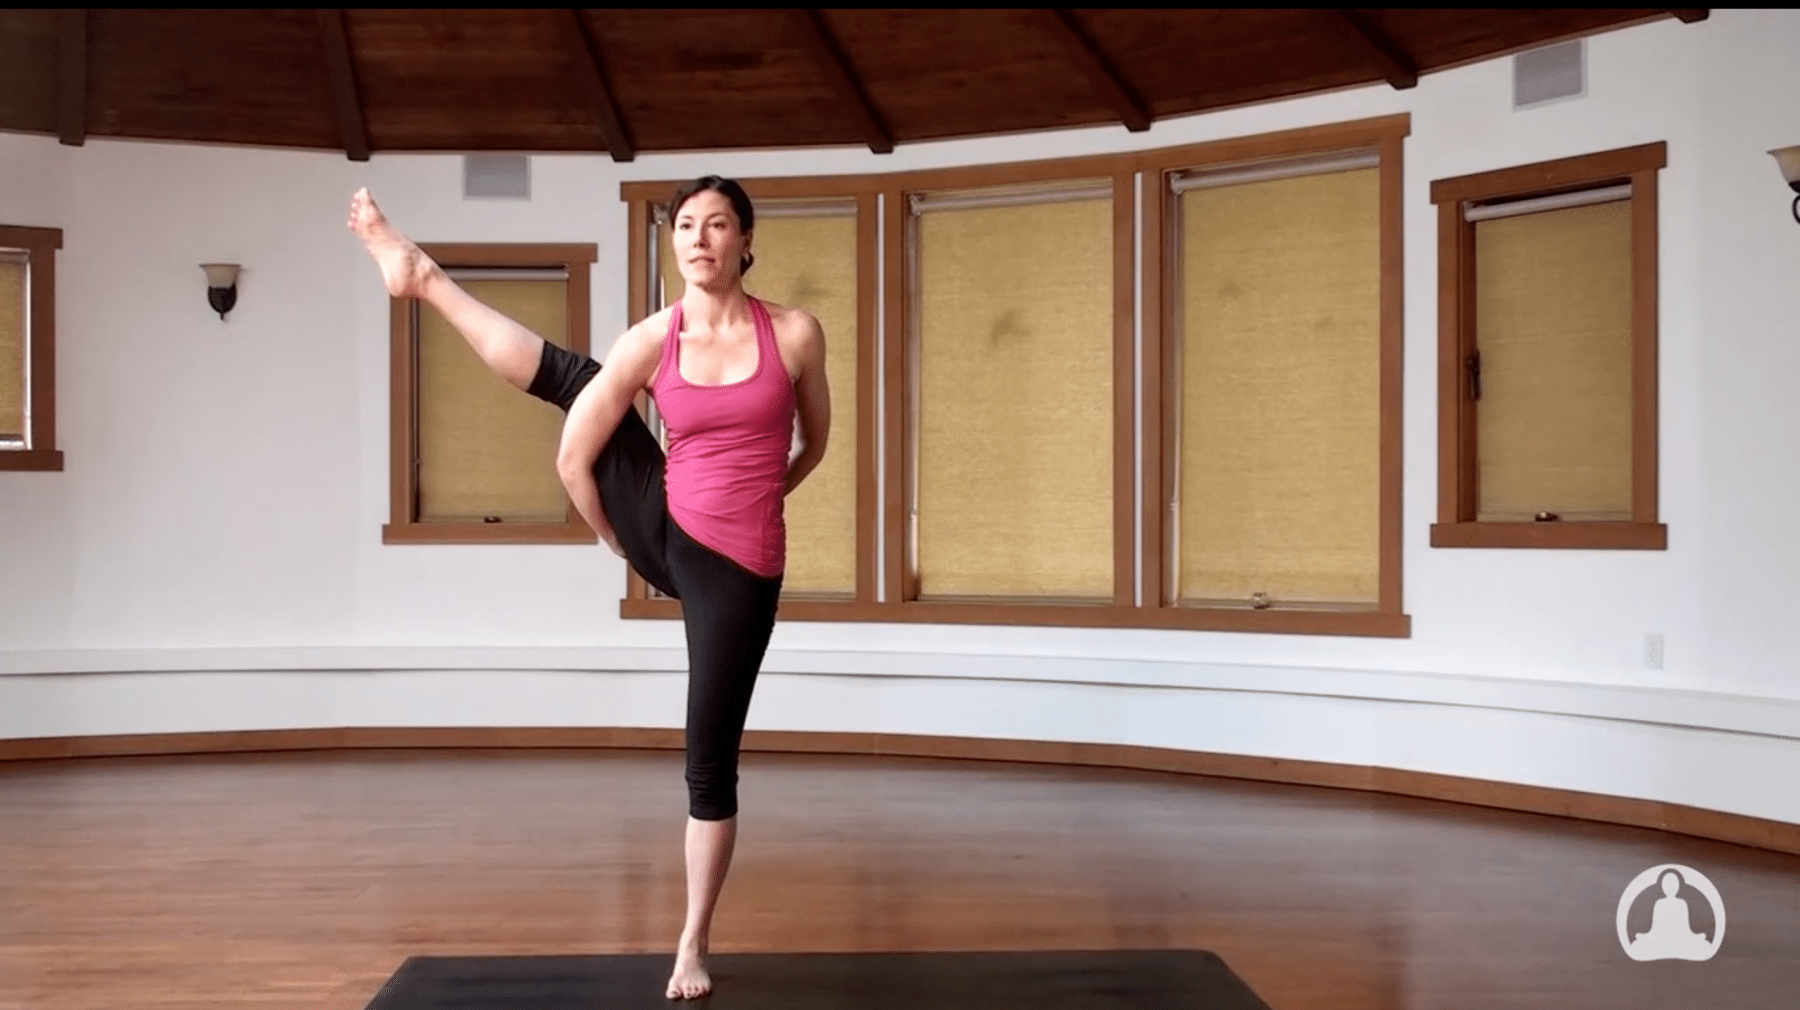 The Humble Warrior Yoga Pose: A 12 Step How To Guide